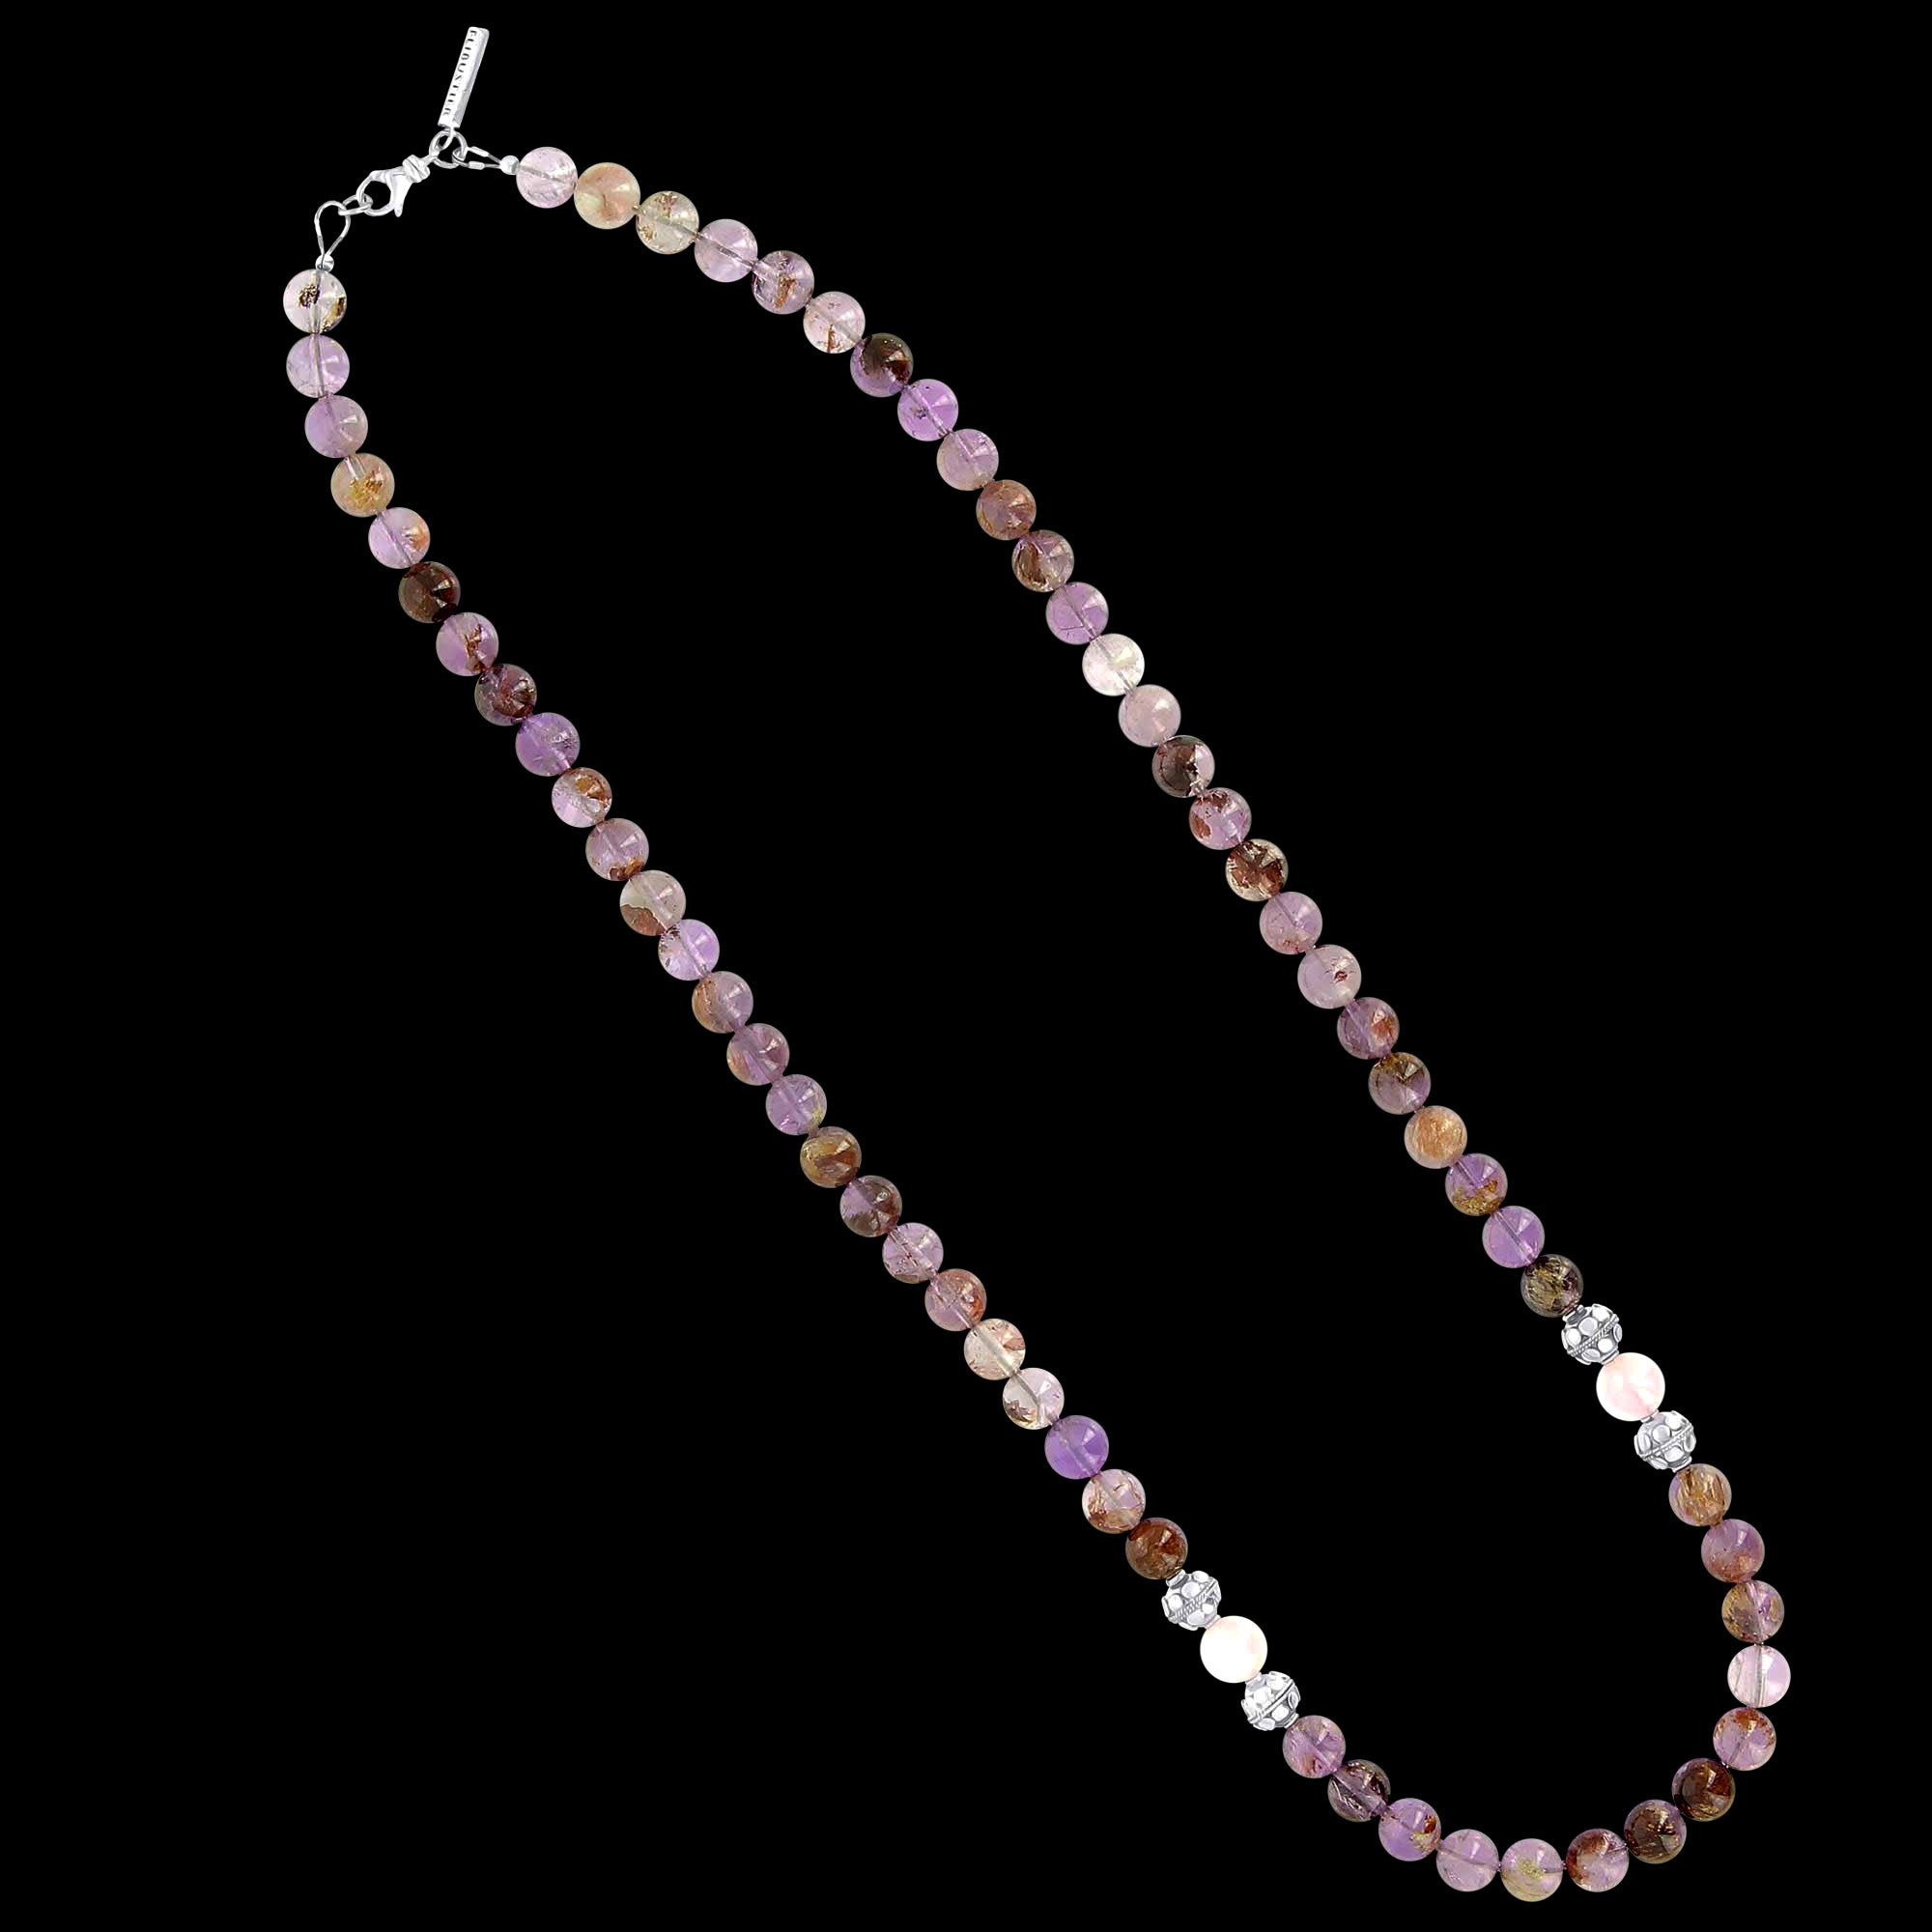 BALI Amethyst short necklace - Gemstone and silver necklace